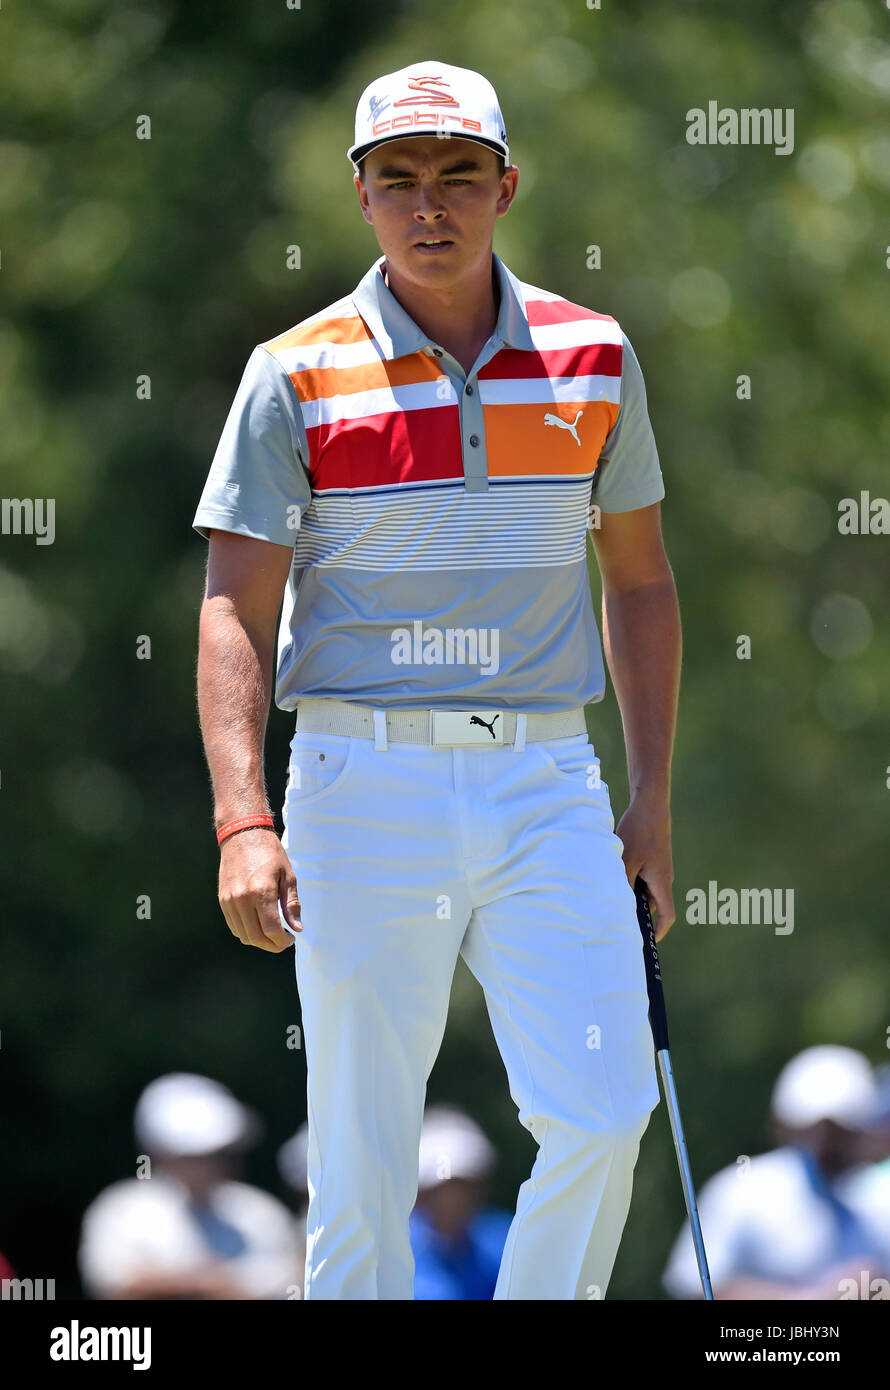 Memphis, TN, USA. 09th June, 2017. Rickie Fowler on the green of the second hole during the second round of the FedEx St. Jude Classic at TPC Southwind in Memphis, TN. Austin McAfee/CSM/Alamy Live News Stock Photo